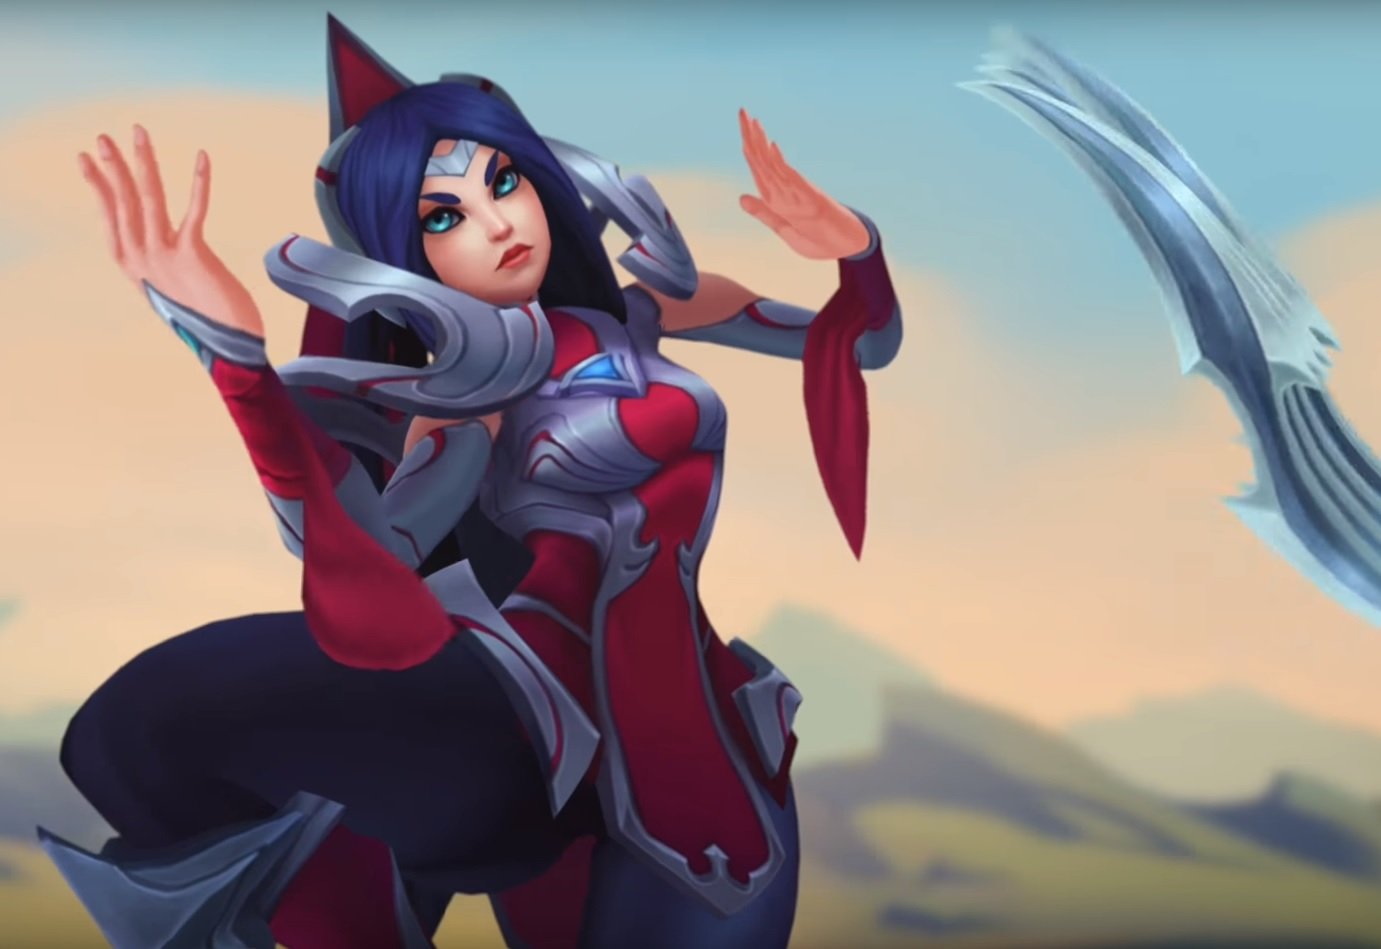 The New Irelia Has Fans Excited To Play League of Legends.